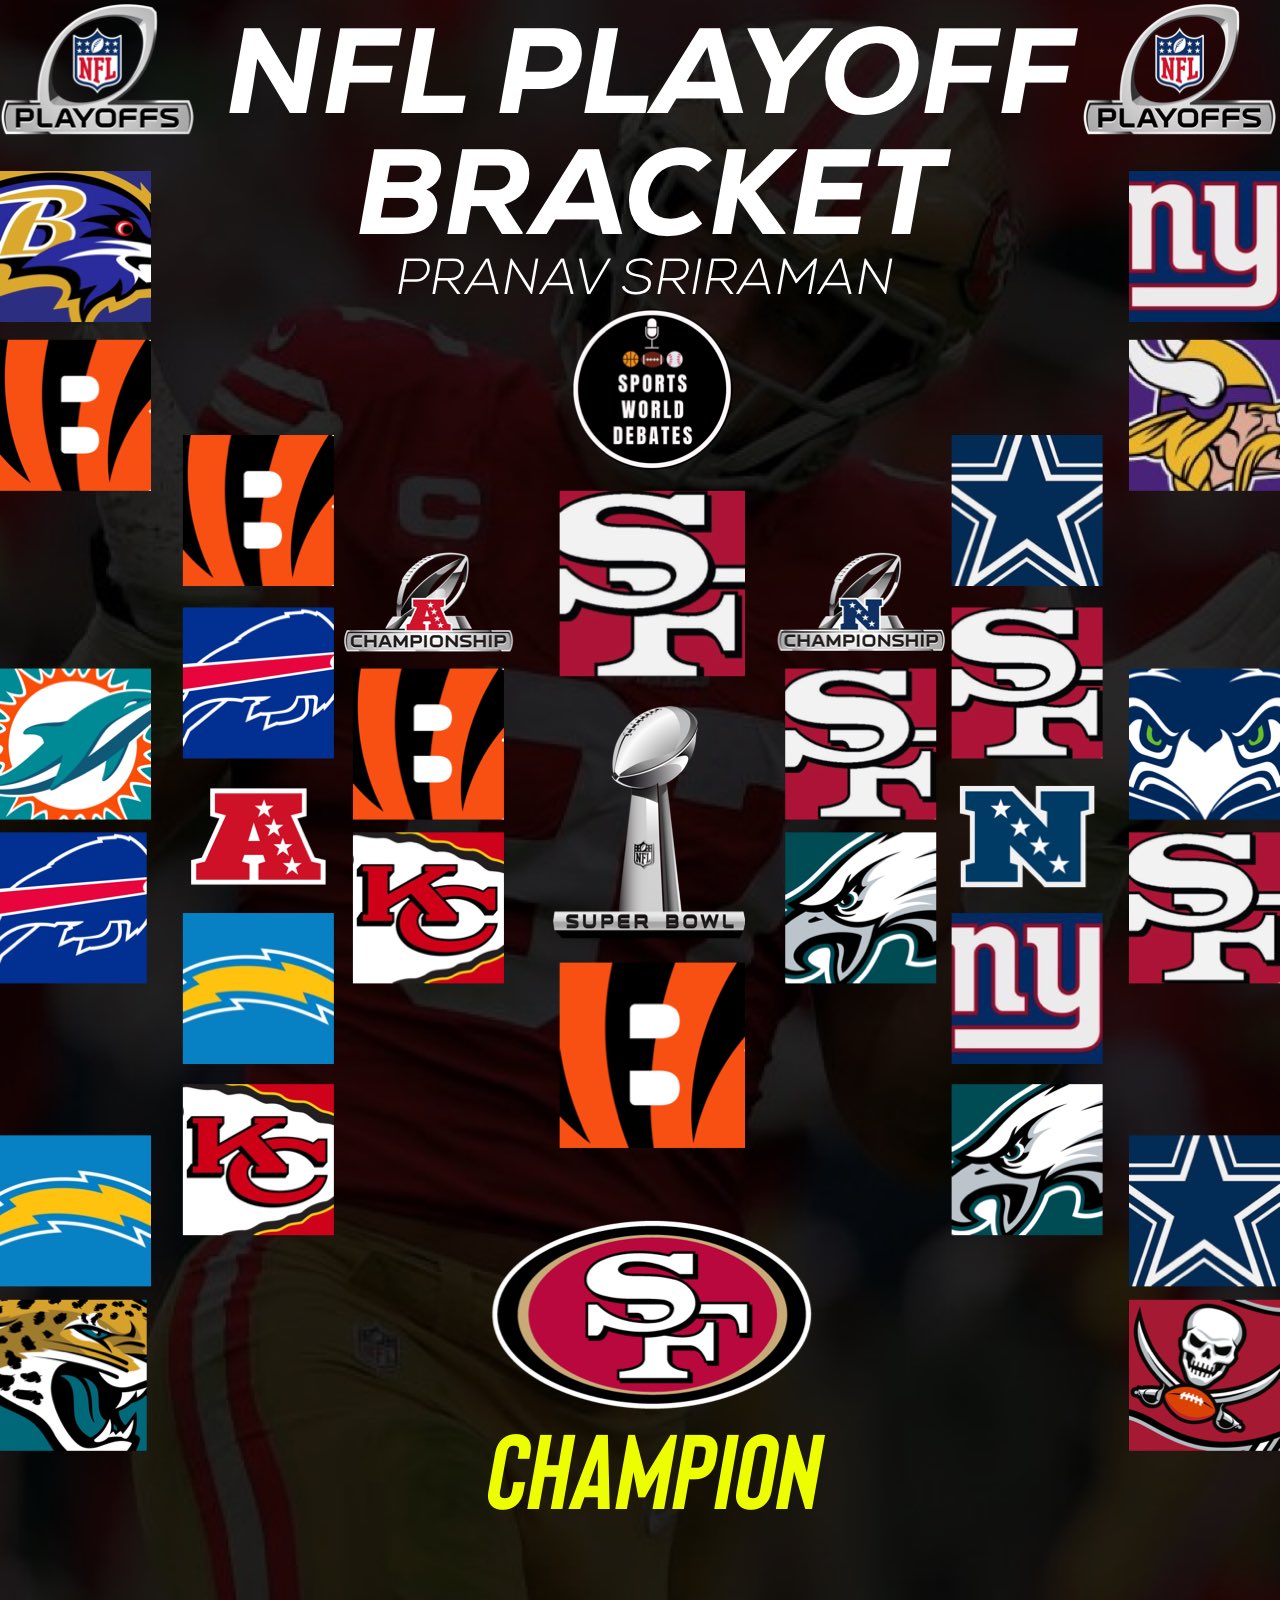 Pranav Sriraman on X: 'Here is my Official Bracket for the 2022 NFL Playoffs!   / X